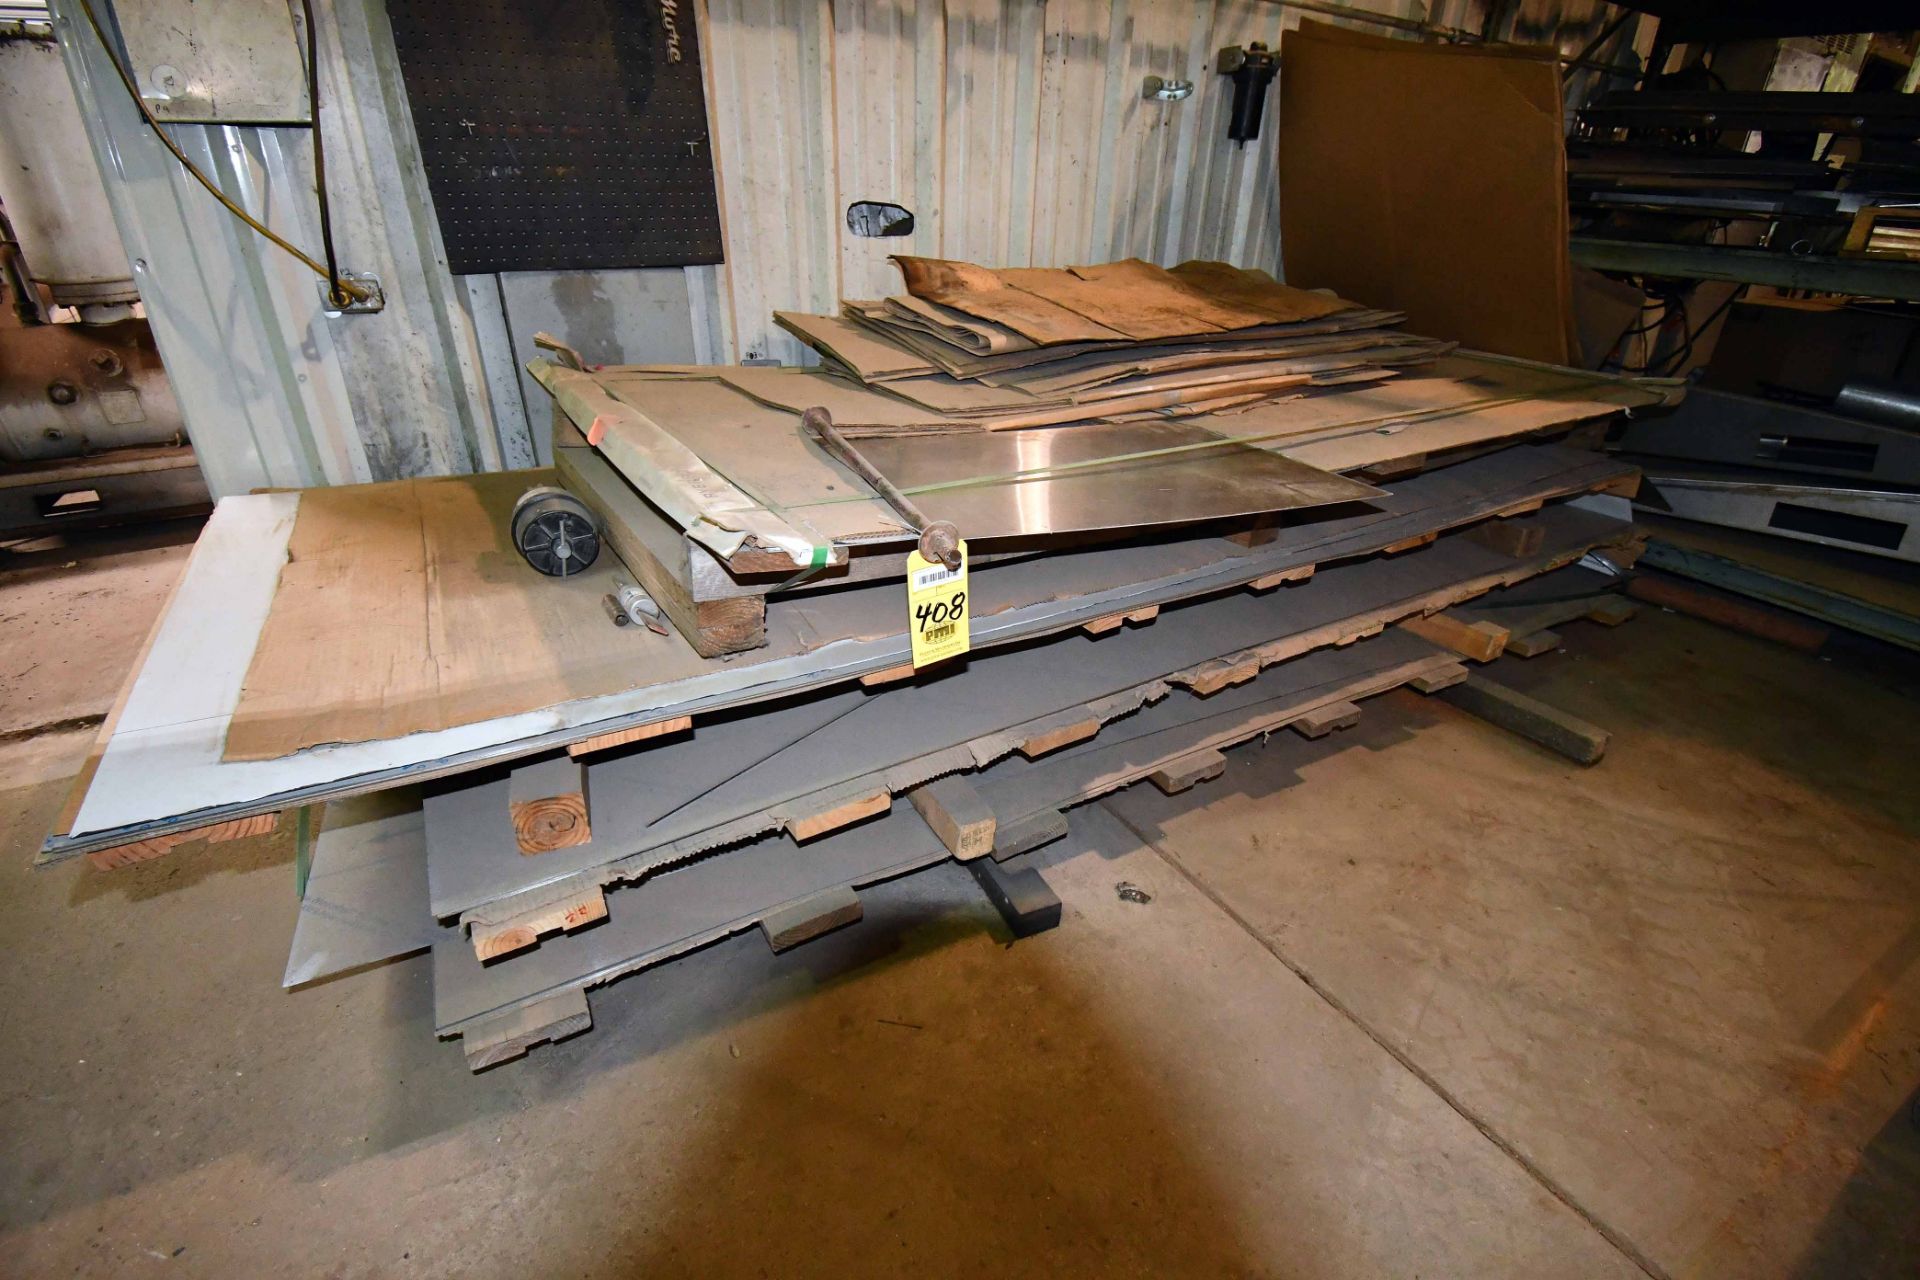 LOT OF STAINLESS STEEL SHEETS, assorted sizes up to 4' x 10'